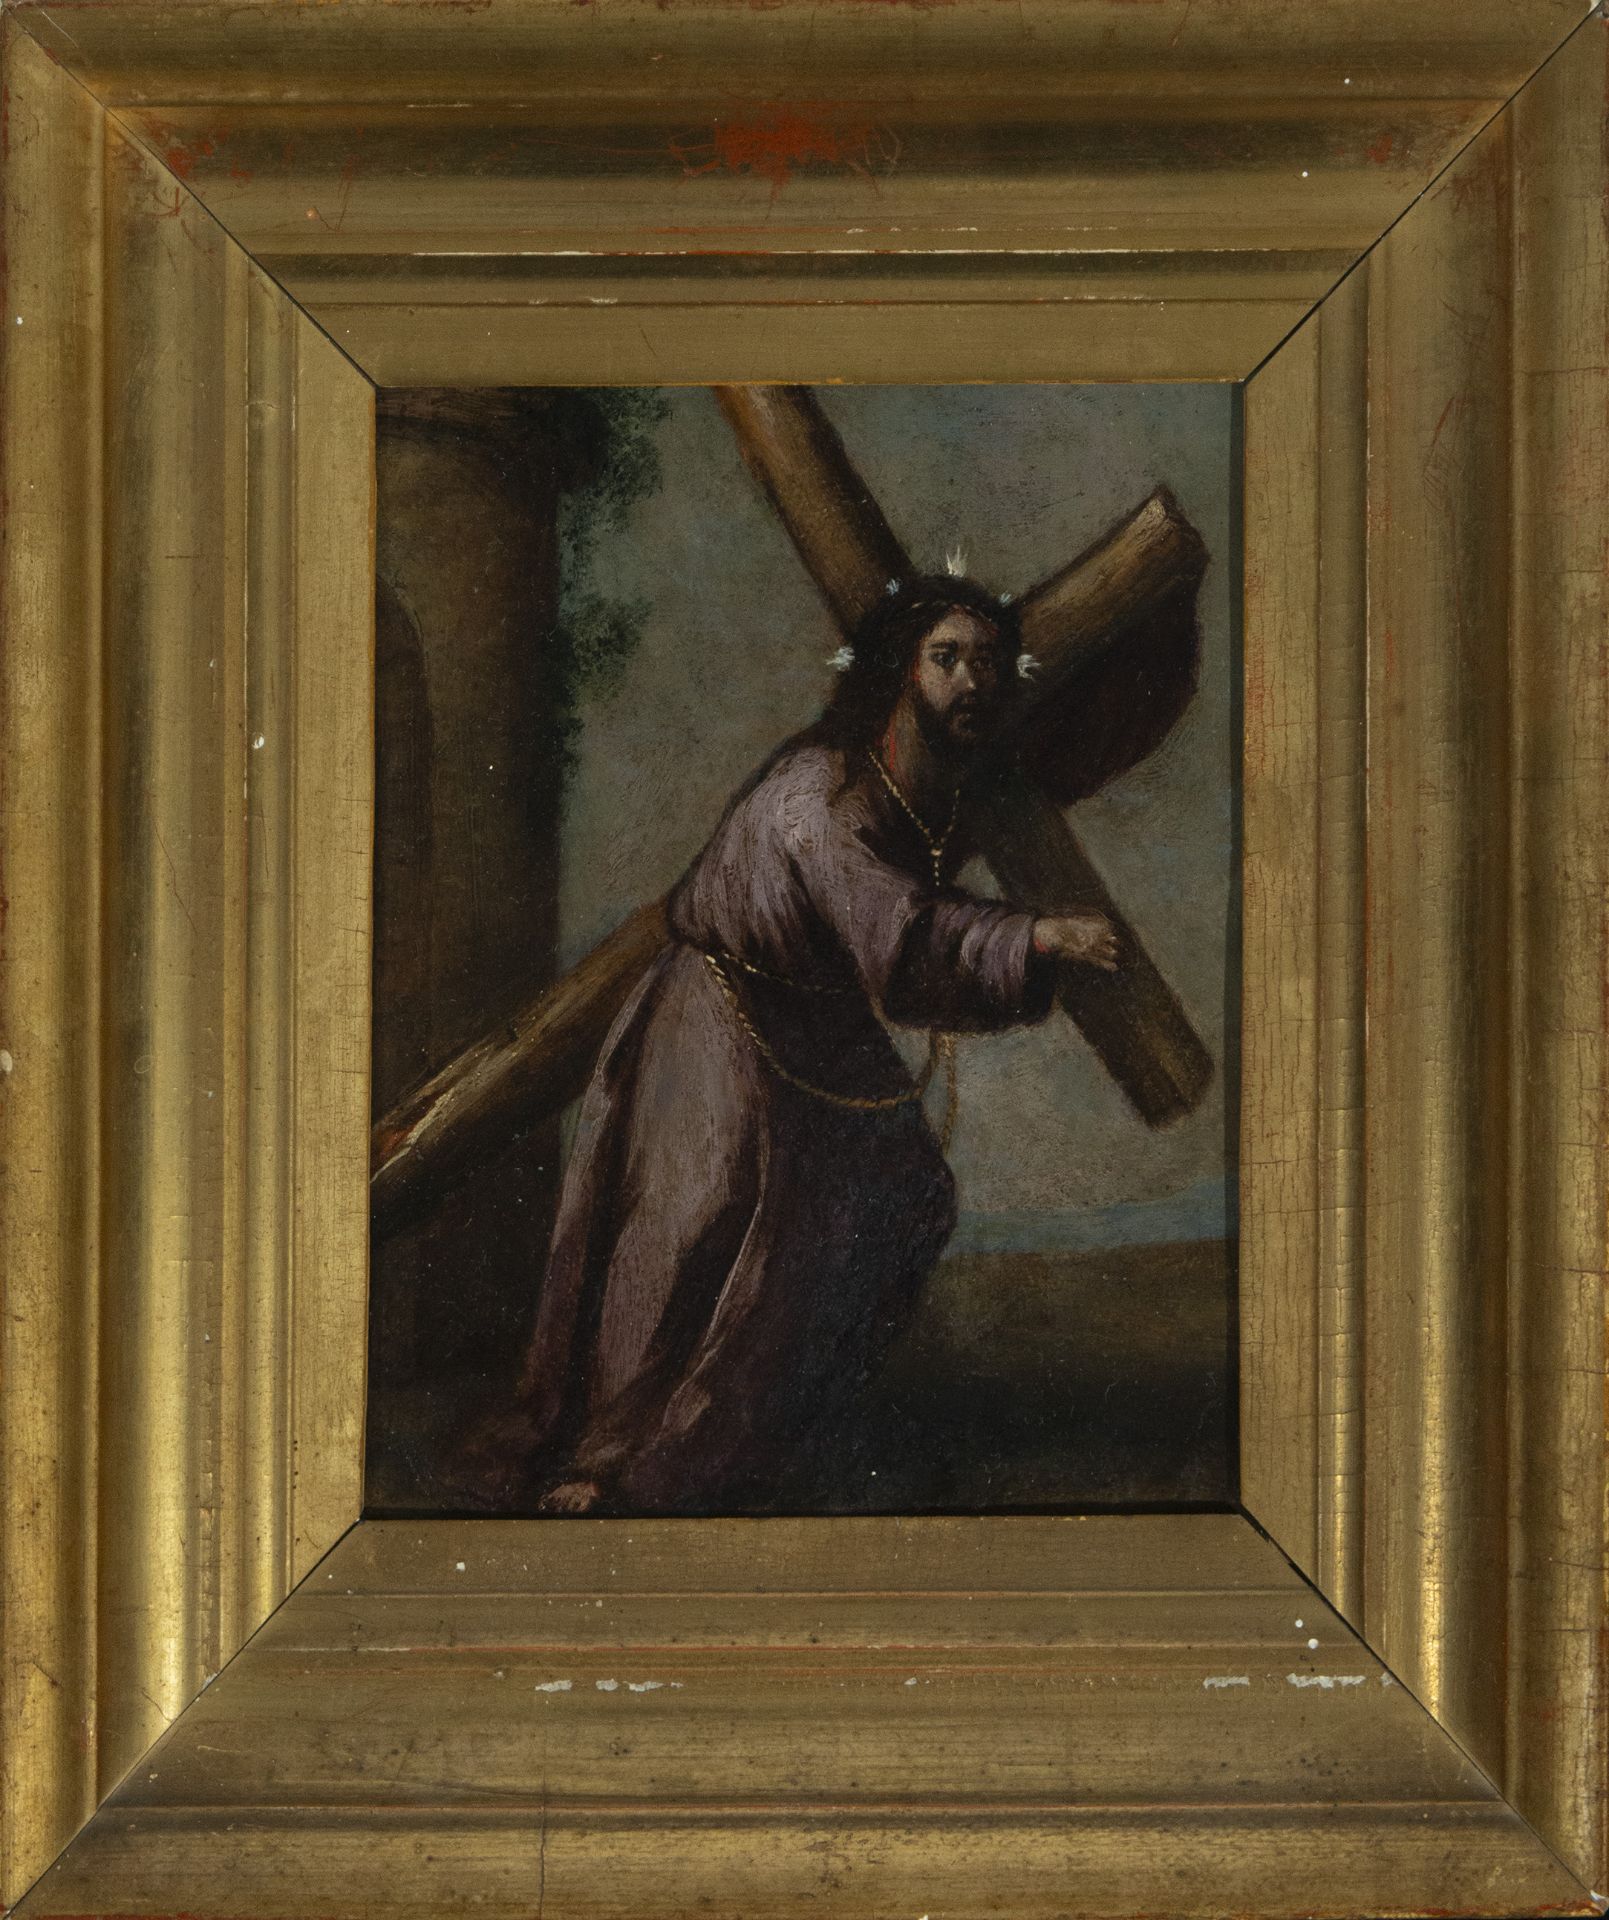 Jesus with the Cross on His Back, colonial work from the 18th century